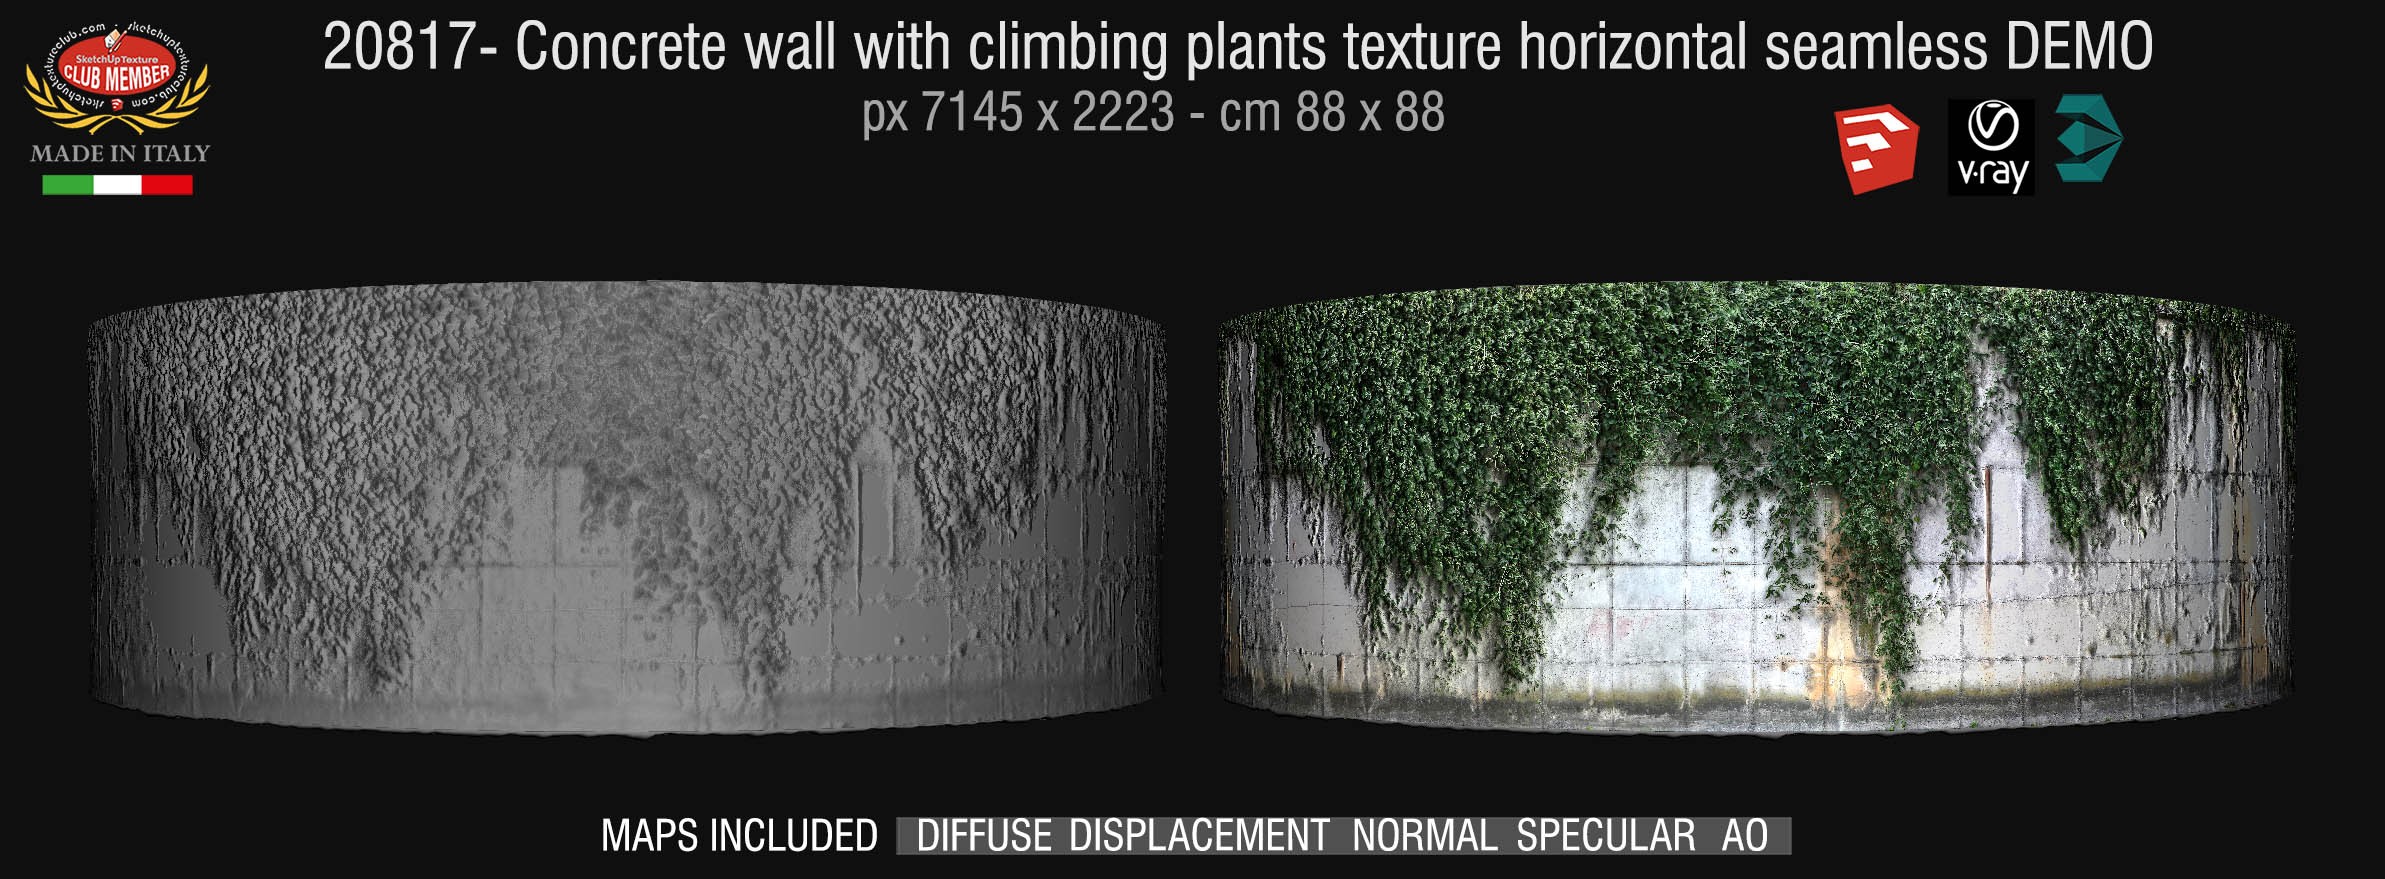 20817 HR Concrete wall with climbing plants texture horizontal seamless and Maps DEMO